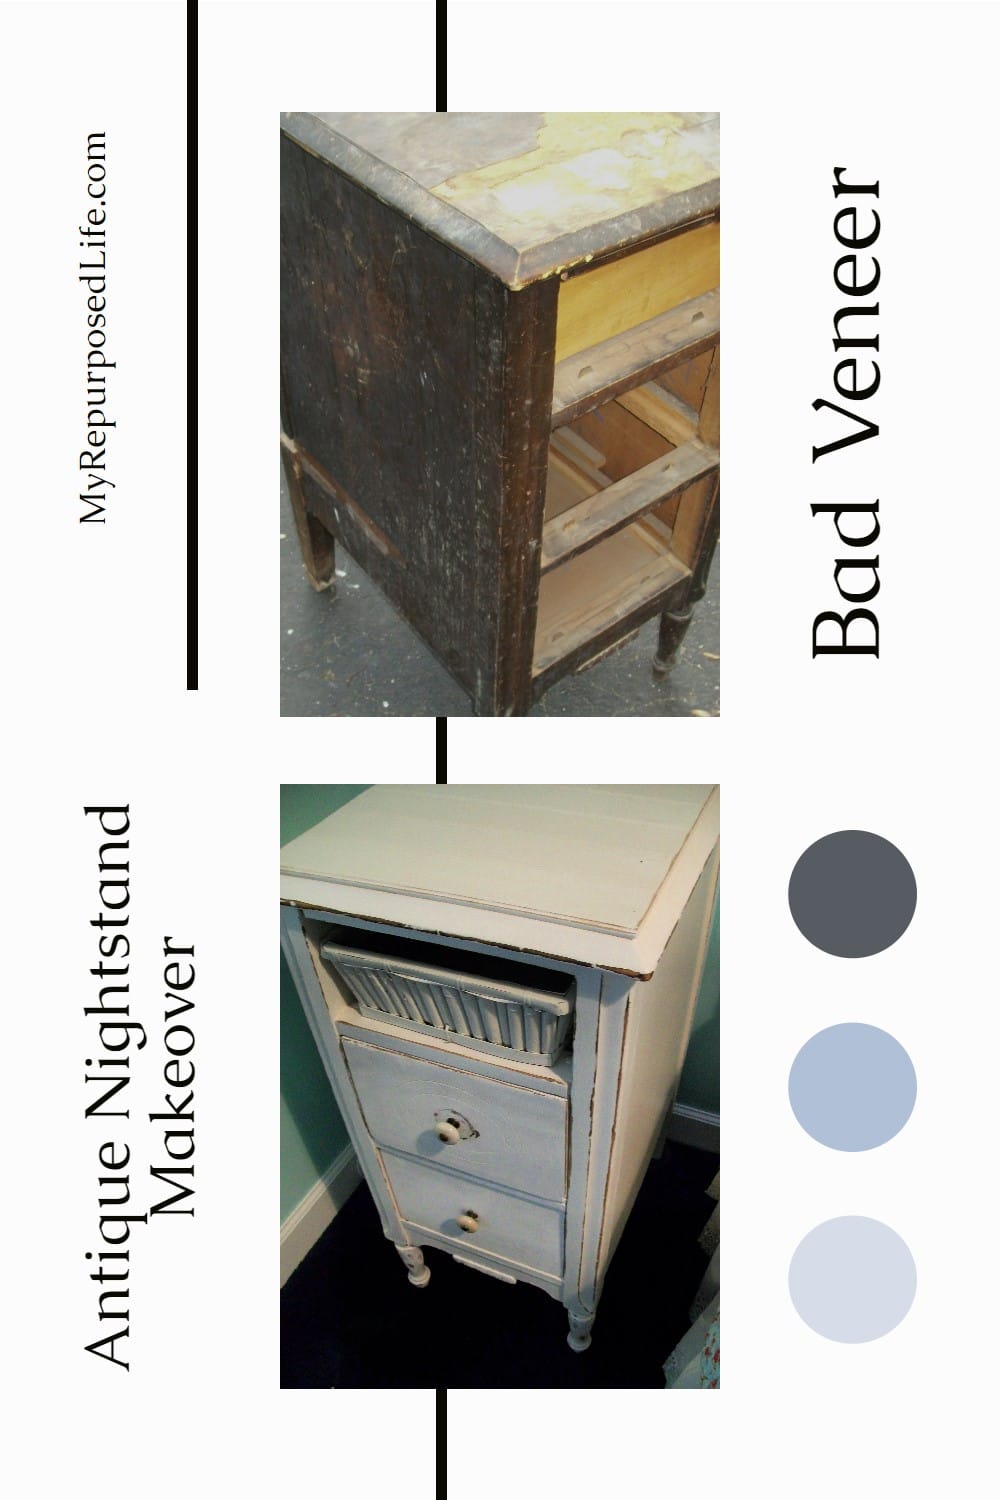 An old nightstand gets a new chance with paint, hardwood flooring and a basket. How to deal with bad veneer for the top and the drawer. Lots of tips! #MyRepurposedLife #repurposed #furniture #nightstand #makeover via @repurposedlife